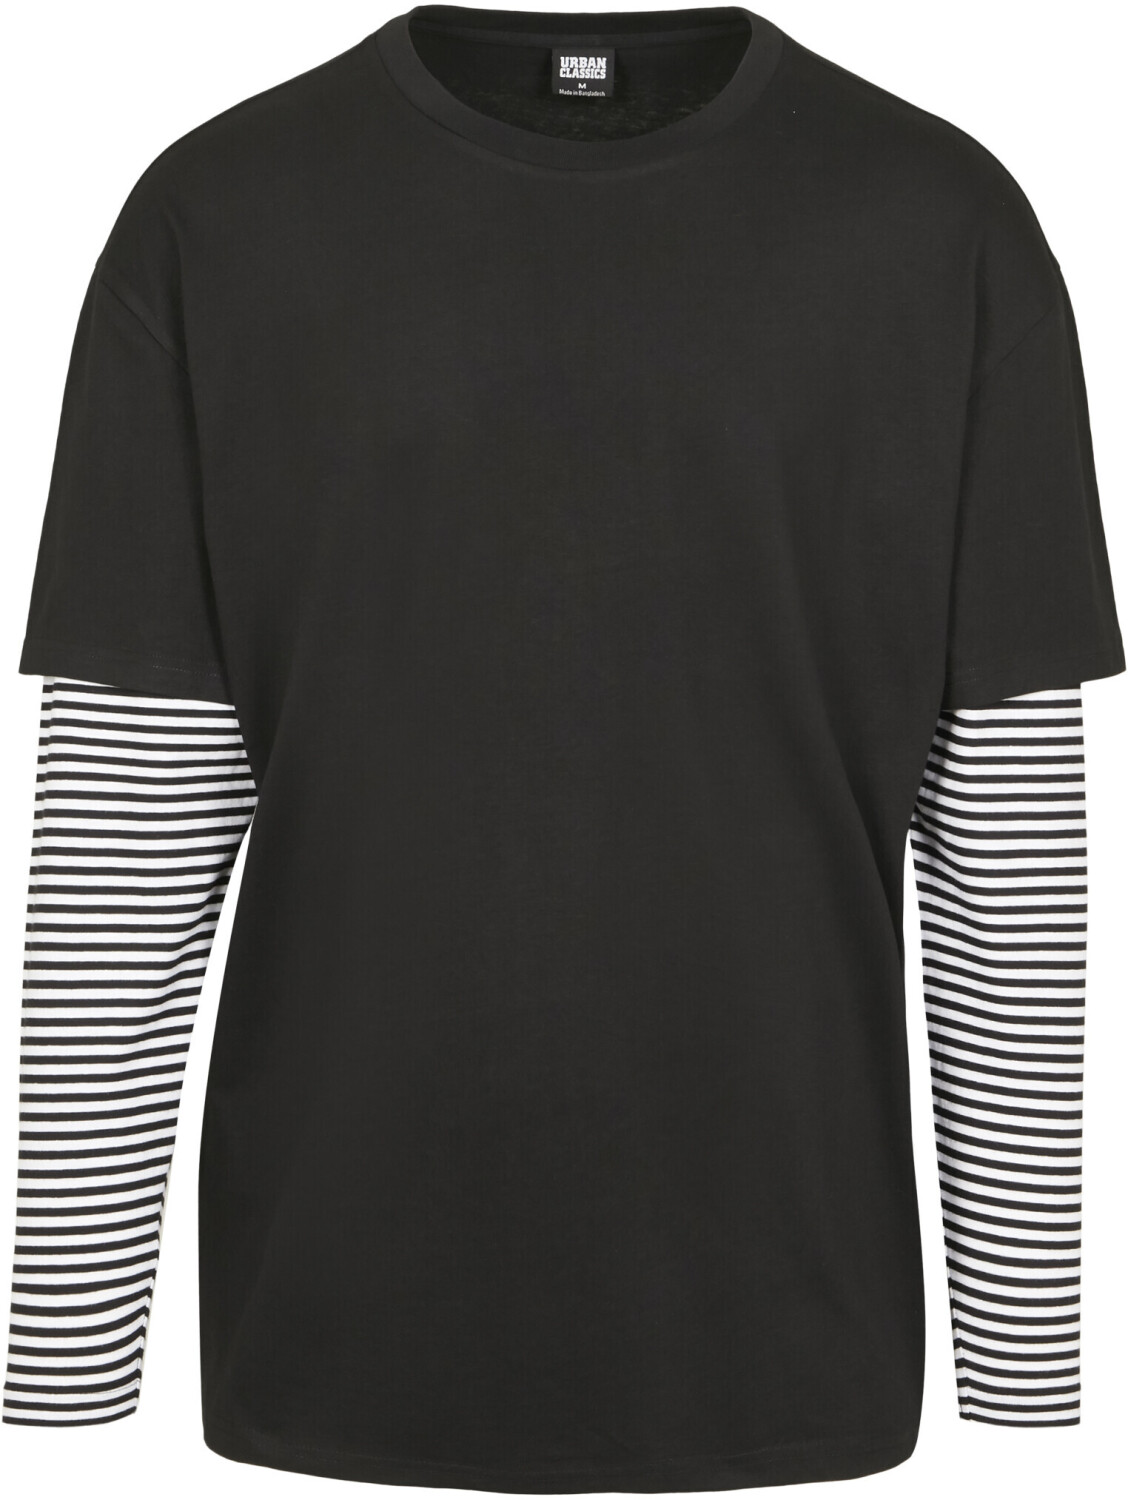 Buy Urban £11.99 black – LS Oversized Classics Double (Today) Tee (TB3498) Deals Best from Striped on Layer